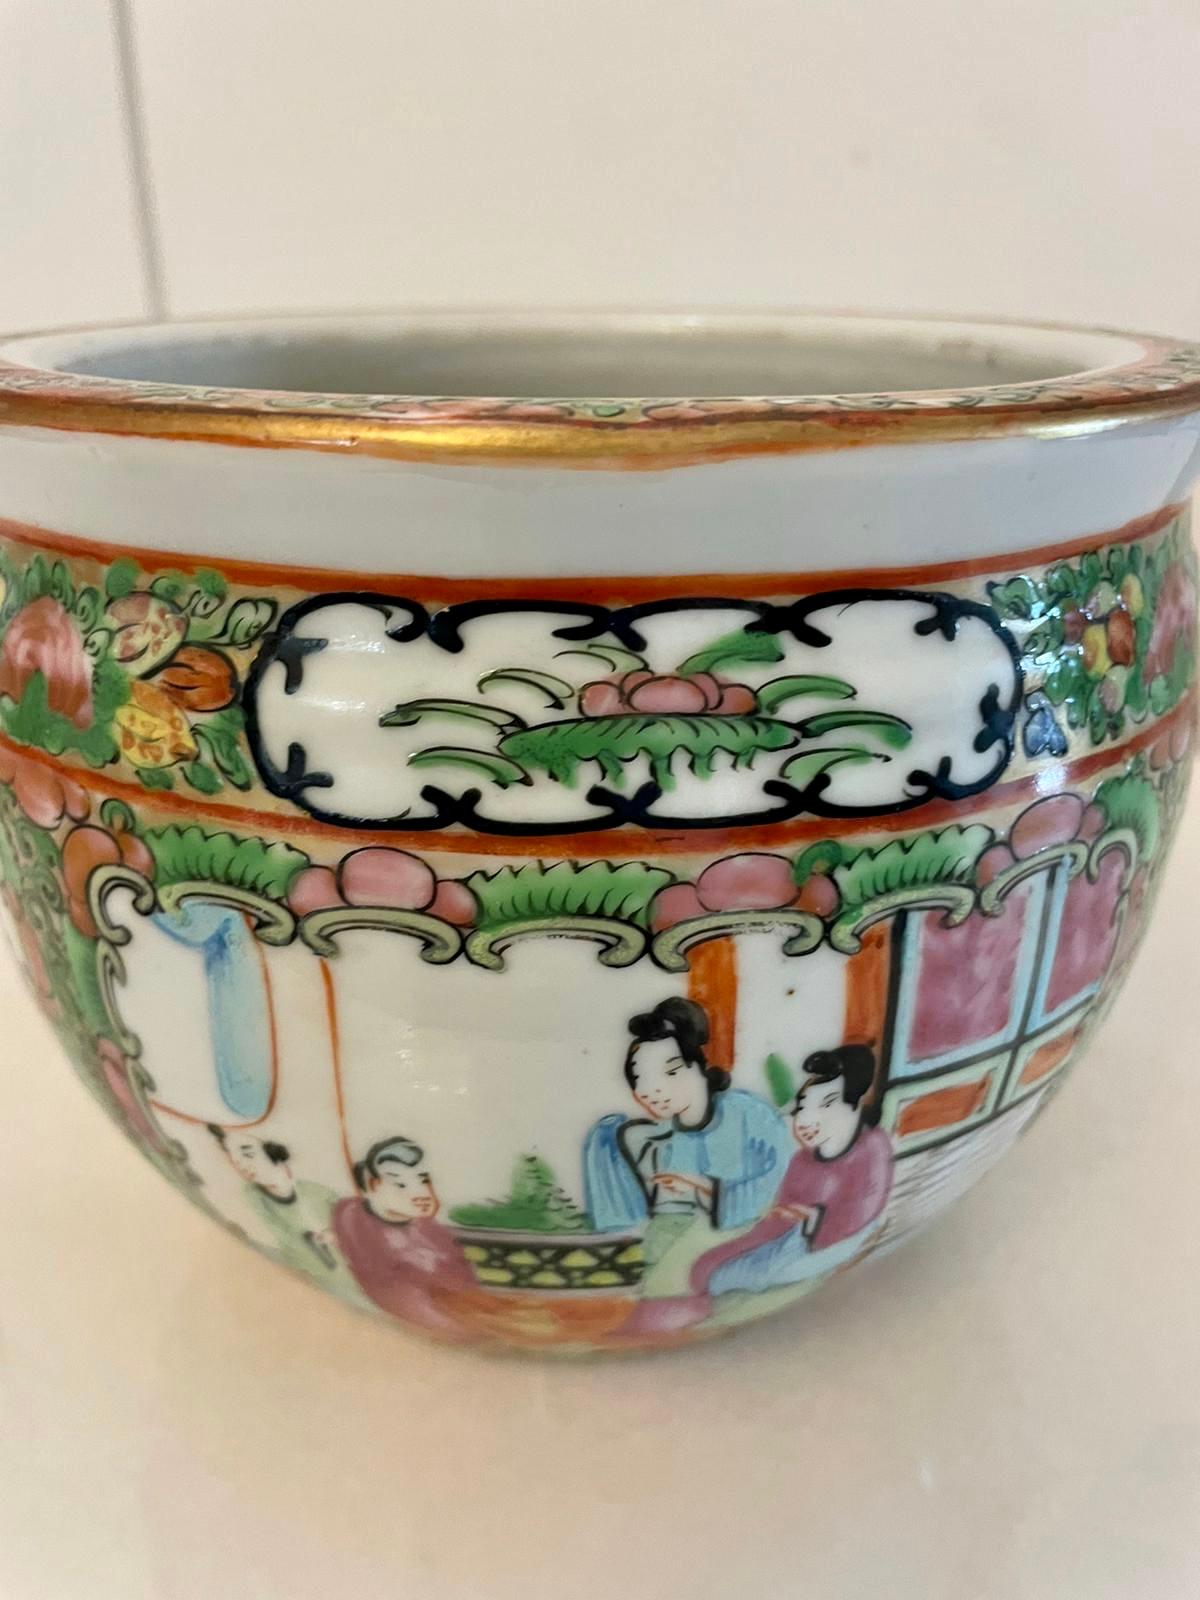 Antique 19th century Chinese quality Canton Famille Rose jardinière decorated with pretty hand painted panels showing scenes of Chinese people, birds, butterflies and flowers using the wonderful Famille Rose colours and gold gilding 

A lovely